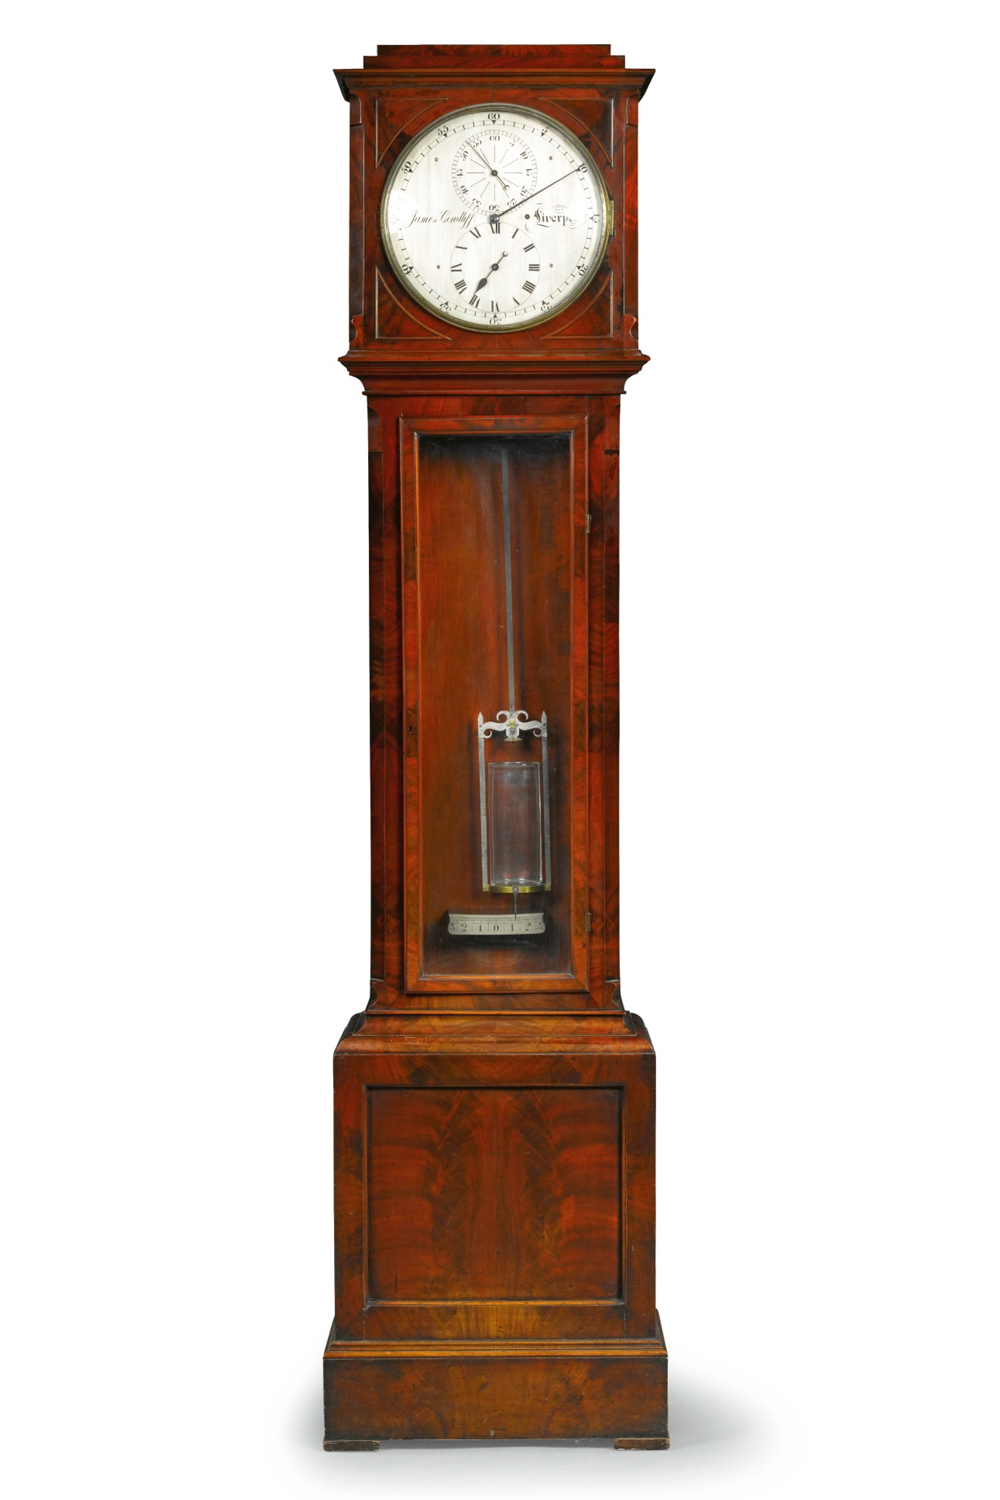 Reference regulators, like this English grandfather clock from the 18th century, were used as master devices to adjust new watches (Image: Sotheby’s)